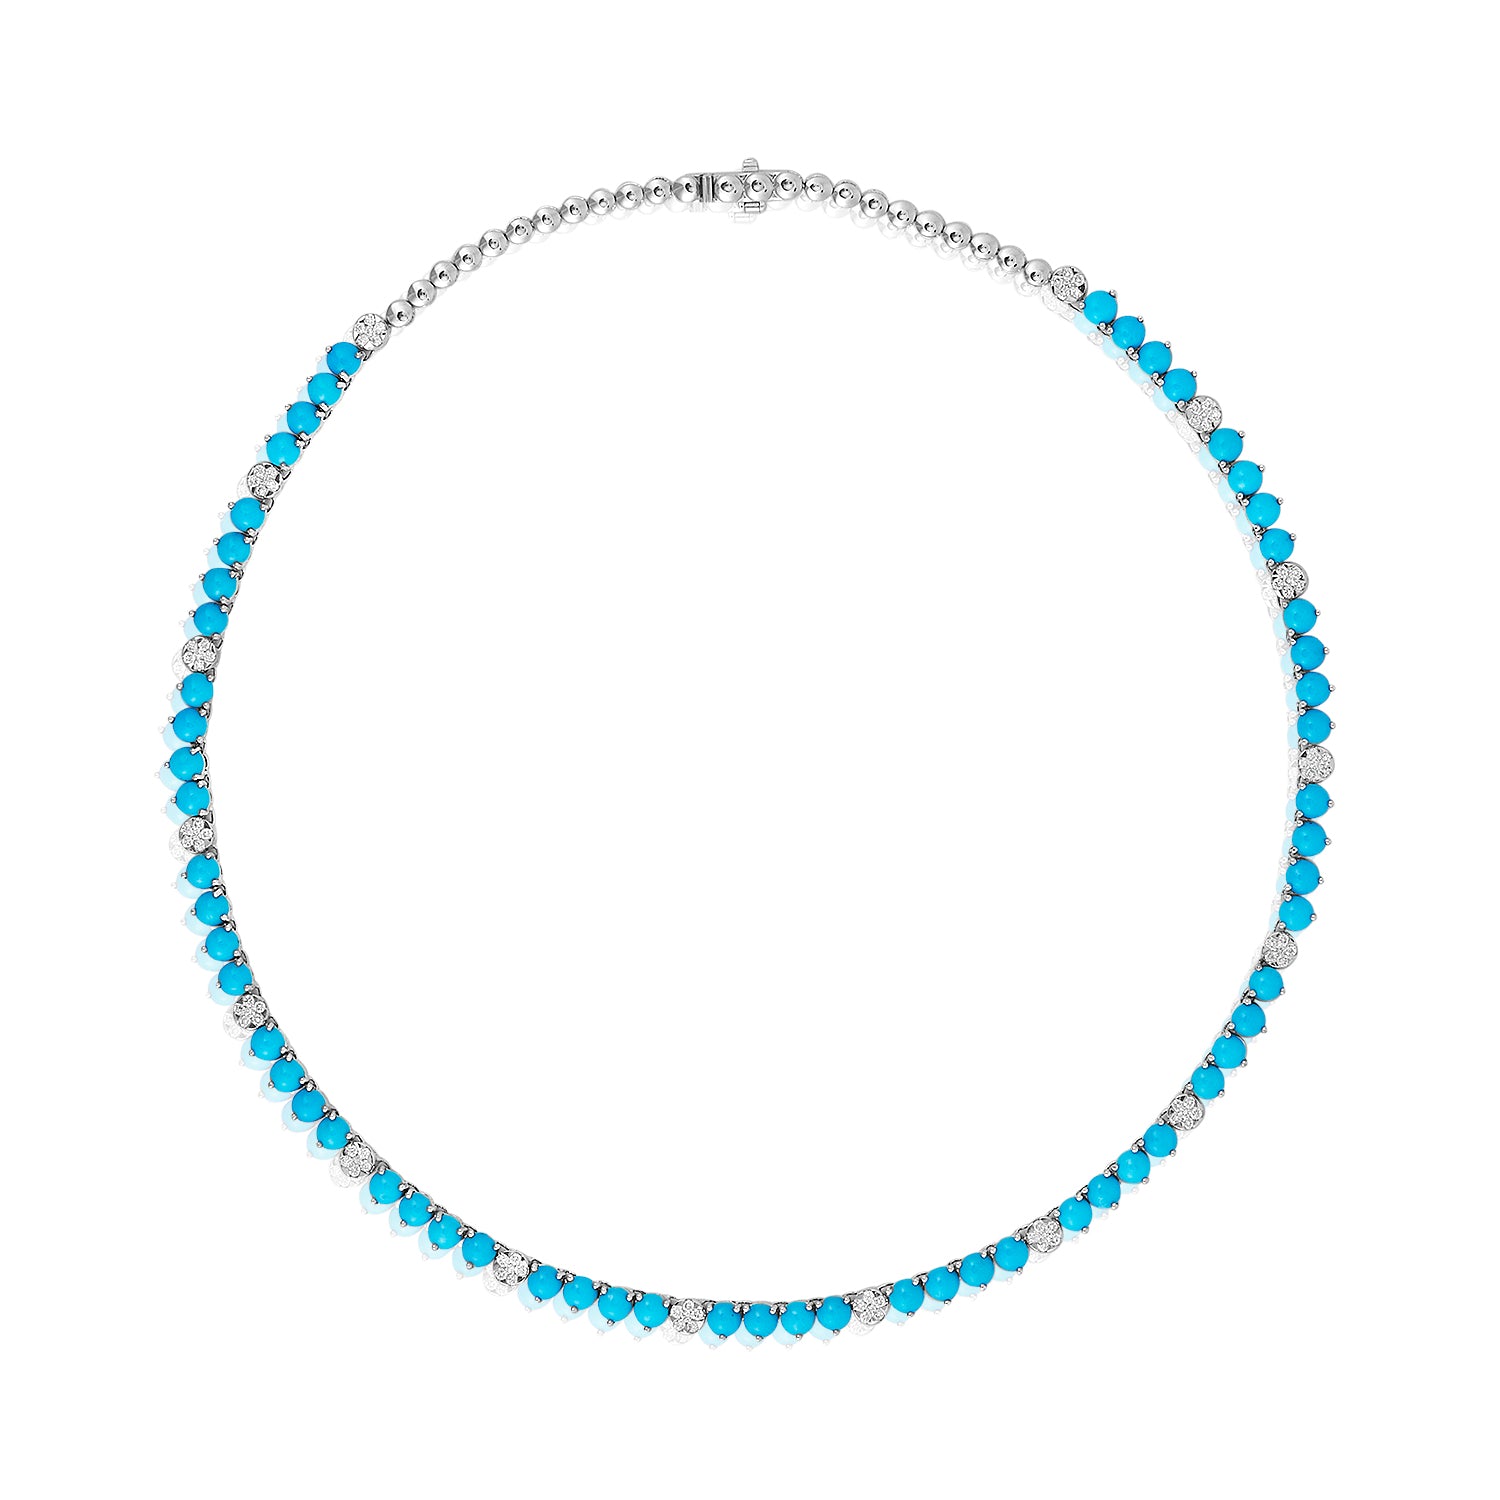 Turquoise Diamond Track Necklace in 18k white gold